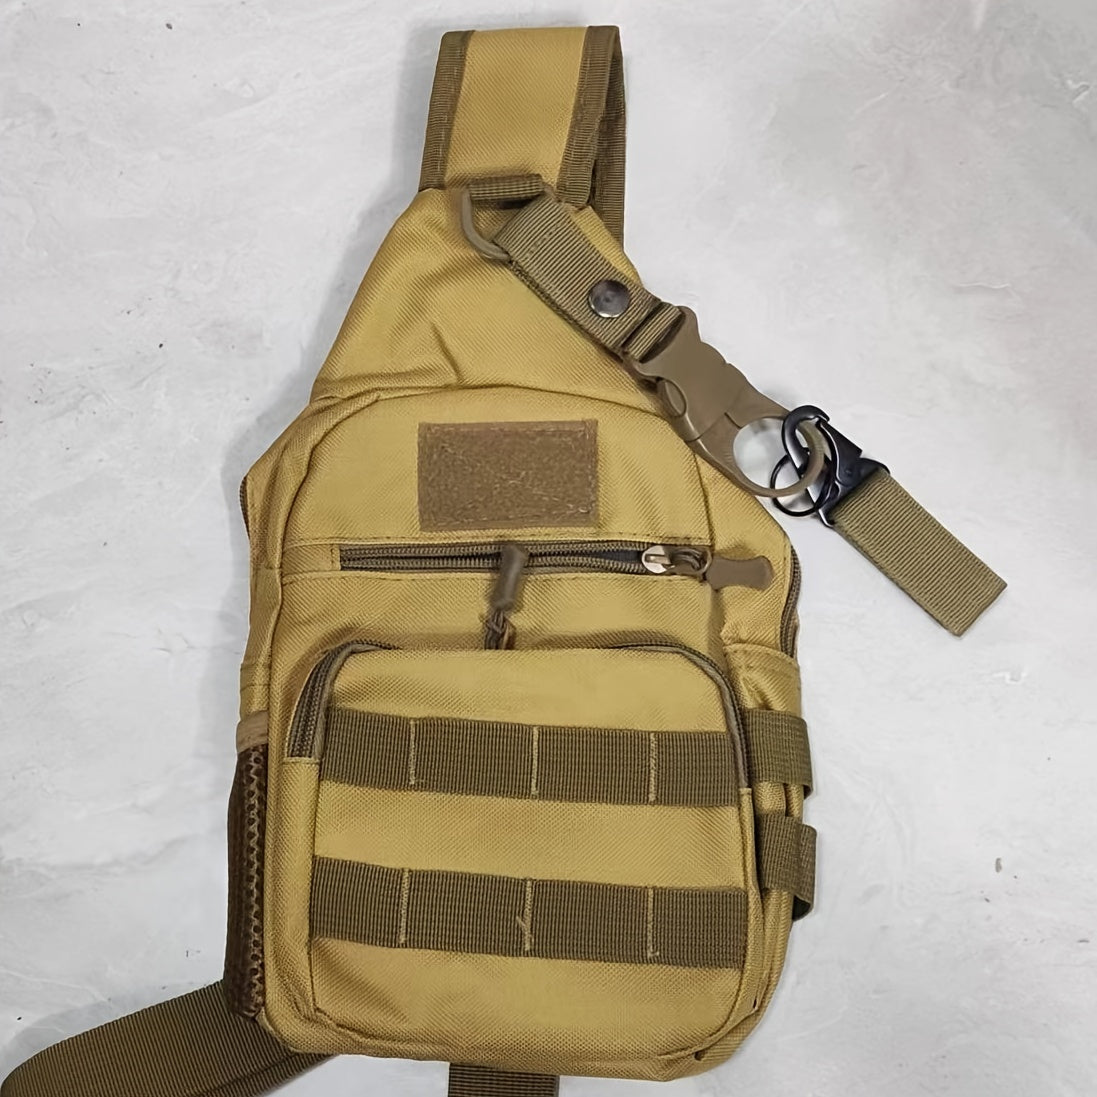 Molle Shoulder Bag For Camping, And Fishing - Durable Trekker Backpack With Multiple Compartments And Pockets